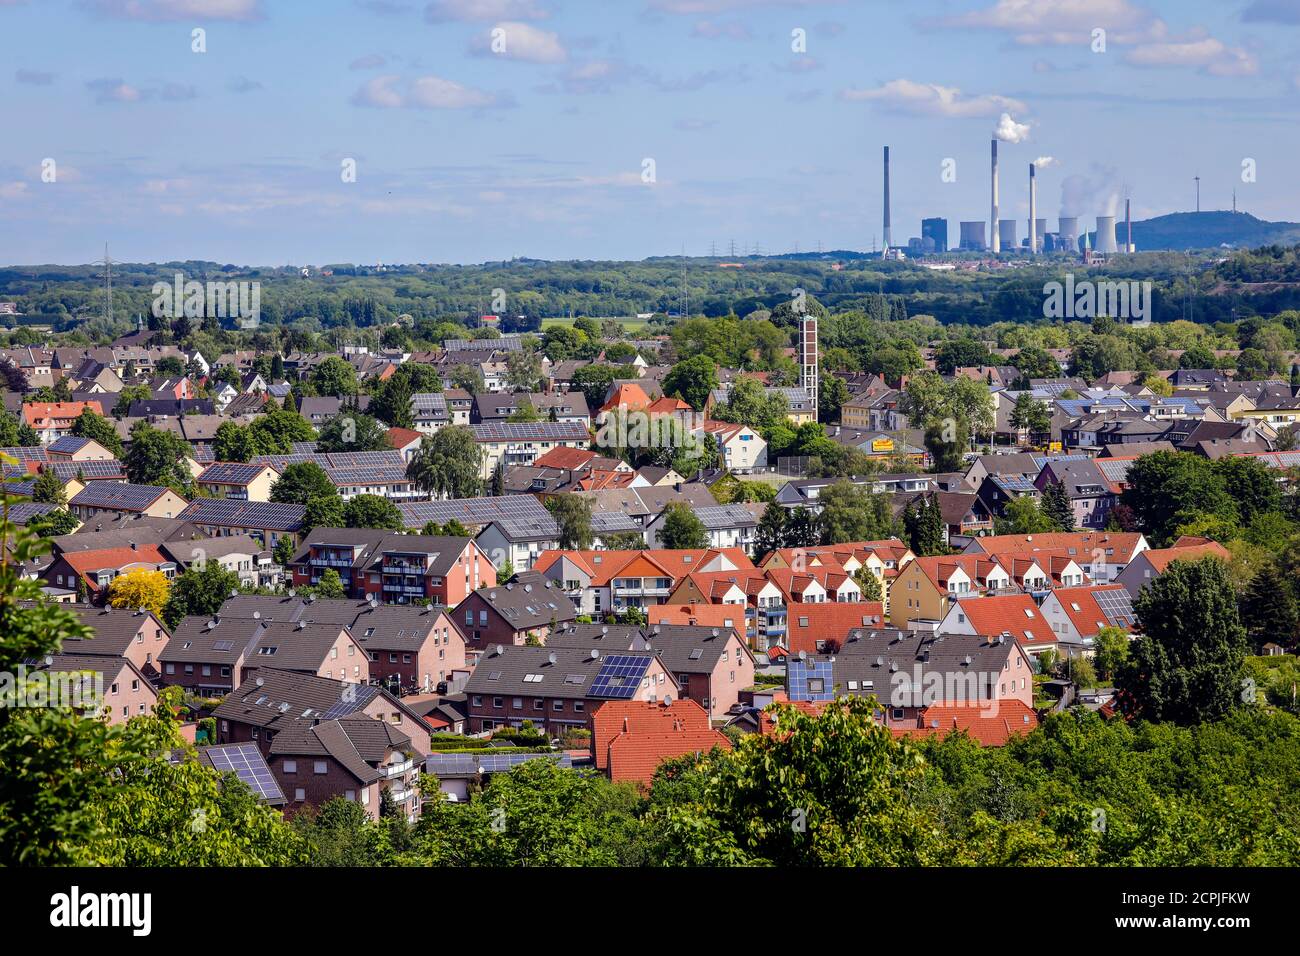 Multi-family houses with solar roofs, solar settlement, Innovation City Ruhr, behind the Uniper coal-fired power plant Gelsenkirchen Scholven, Stock Photo